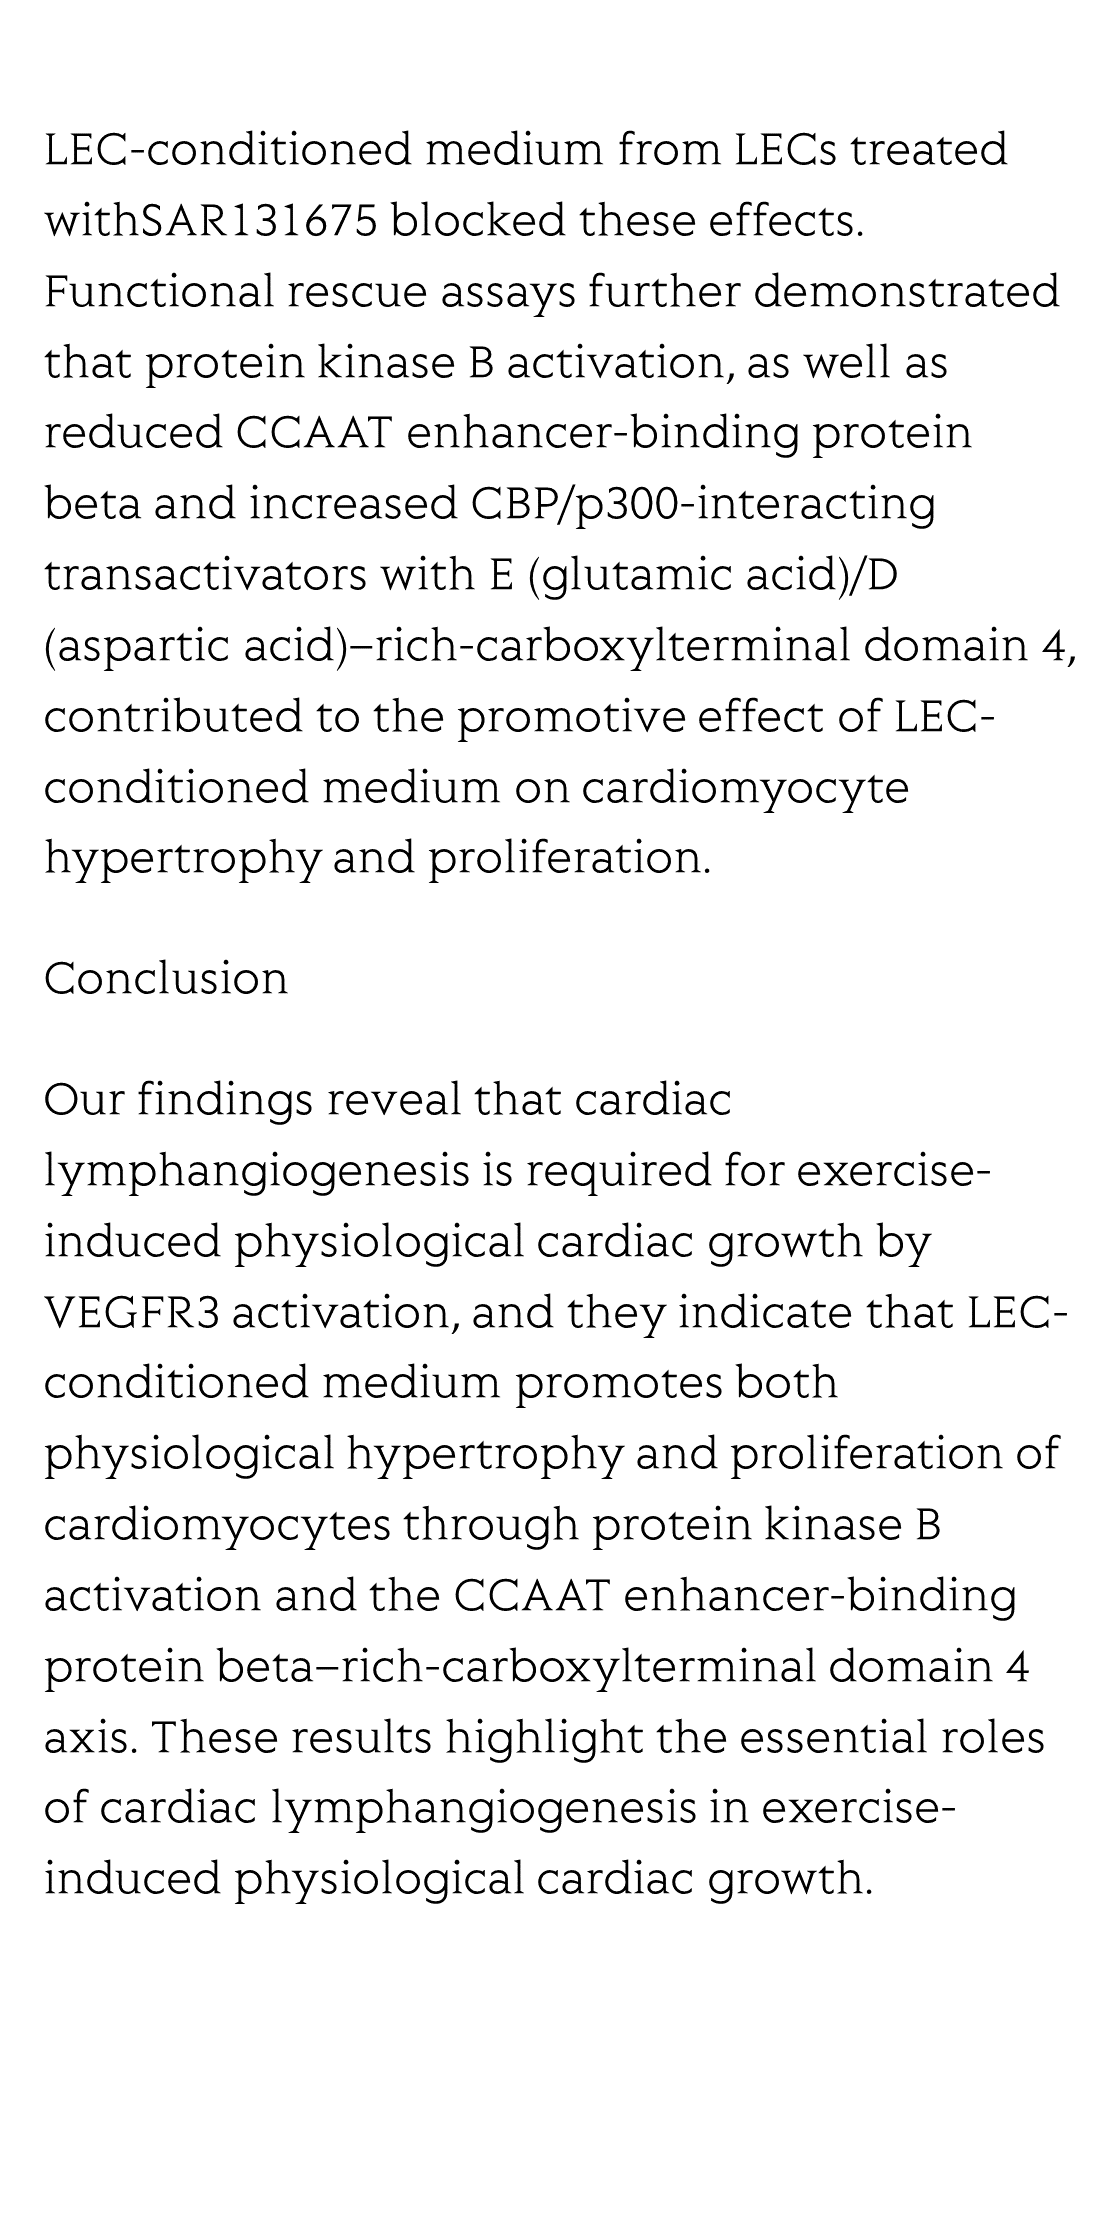 Lymphangiogenesis contributes to exercise-induced physiological cardiac growth_4